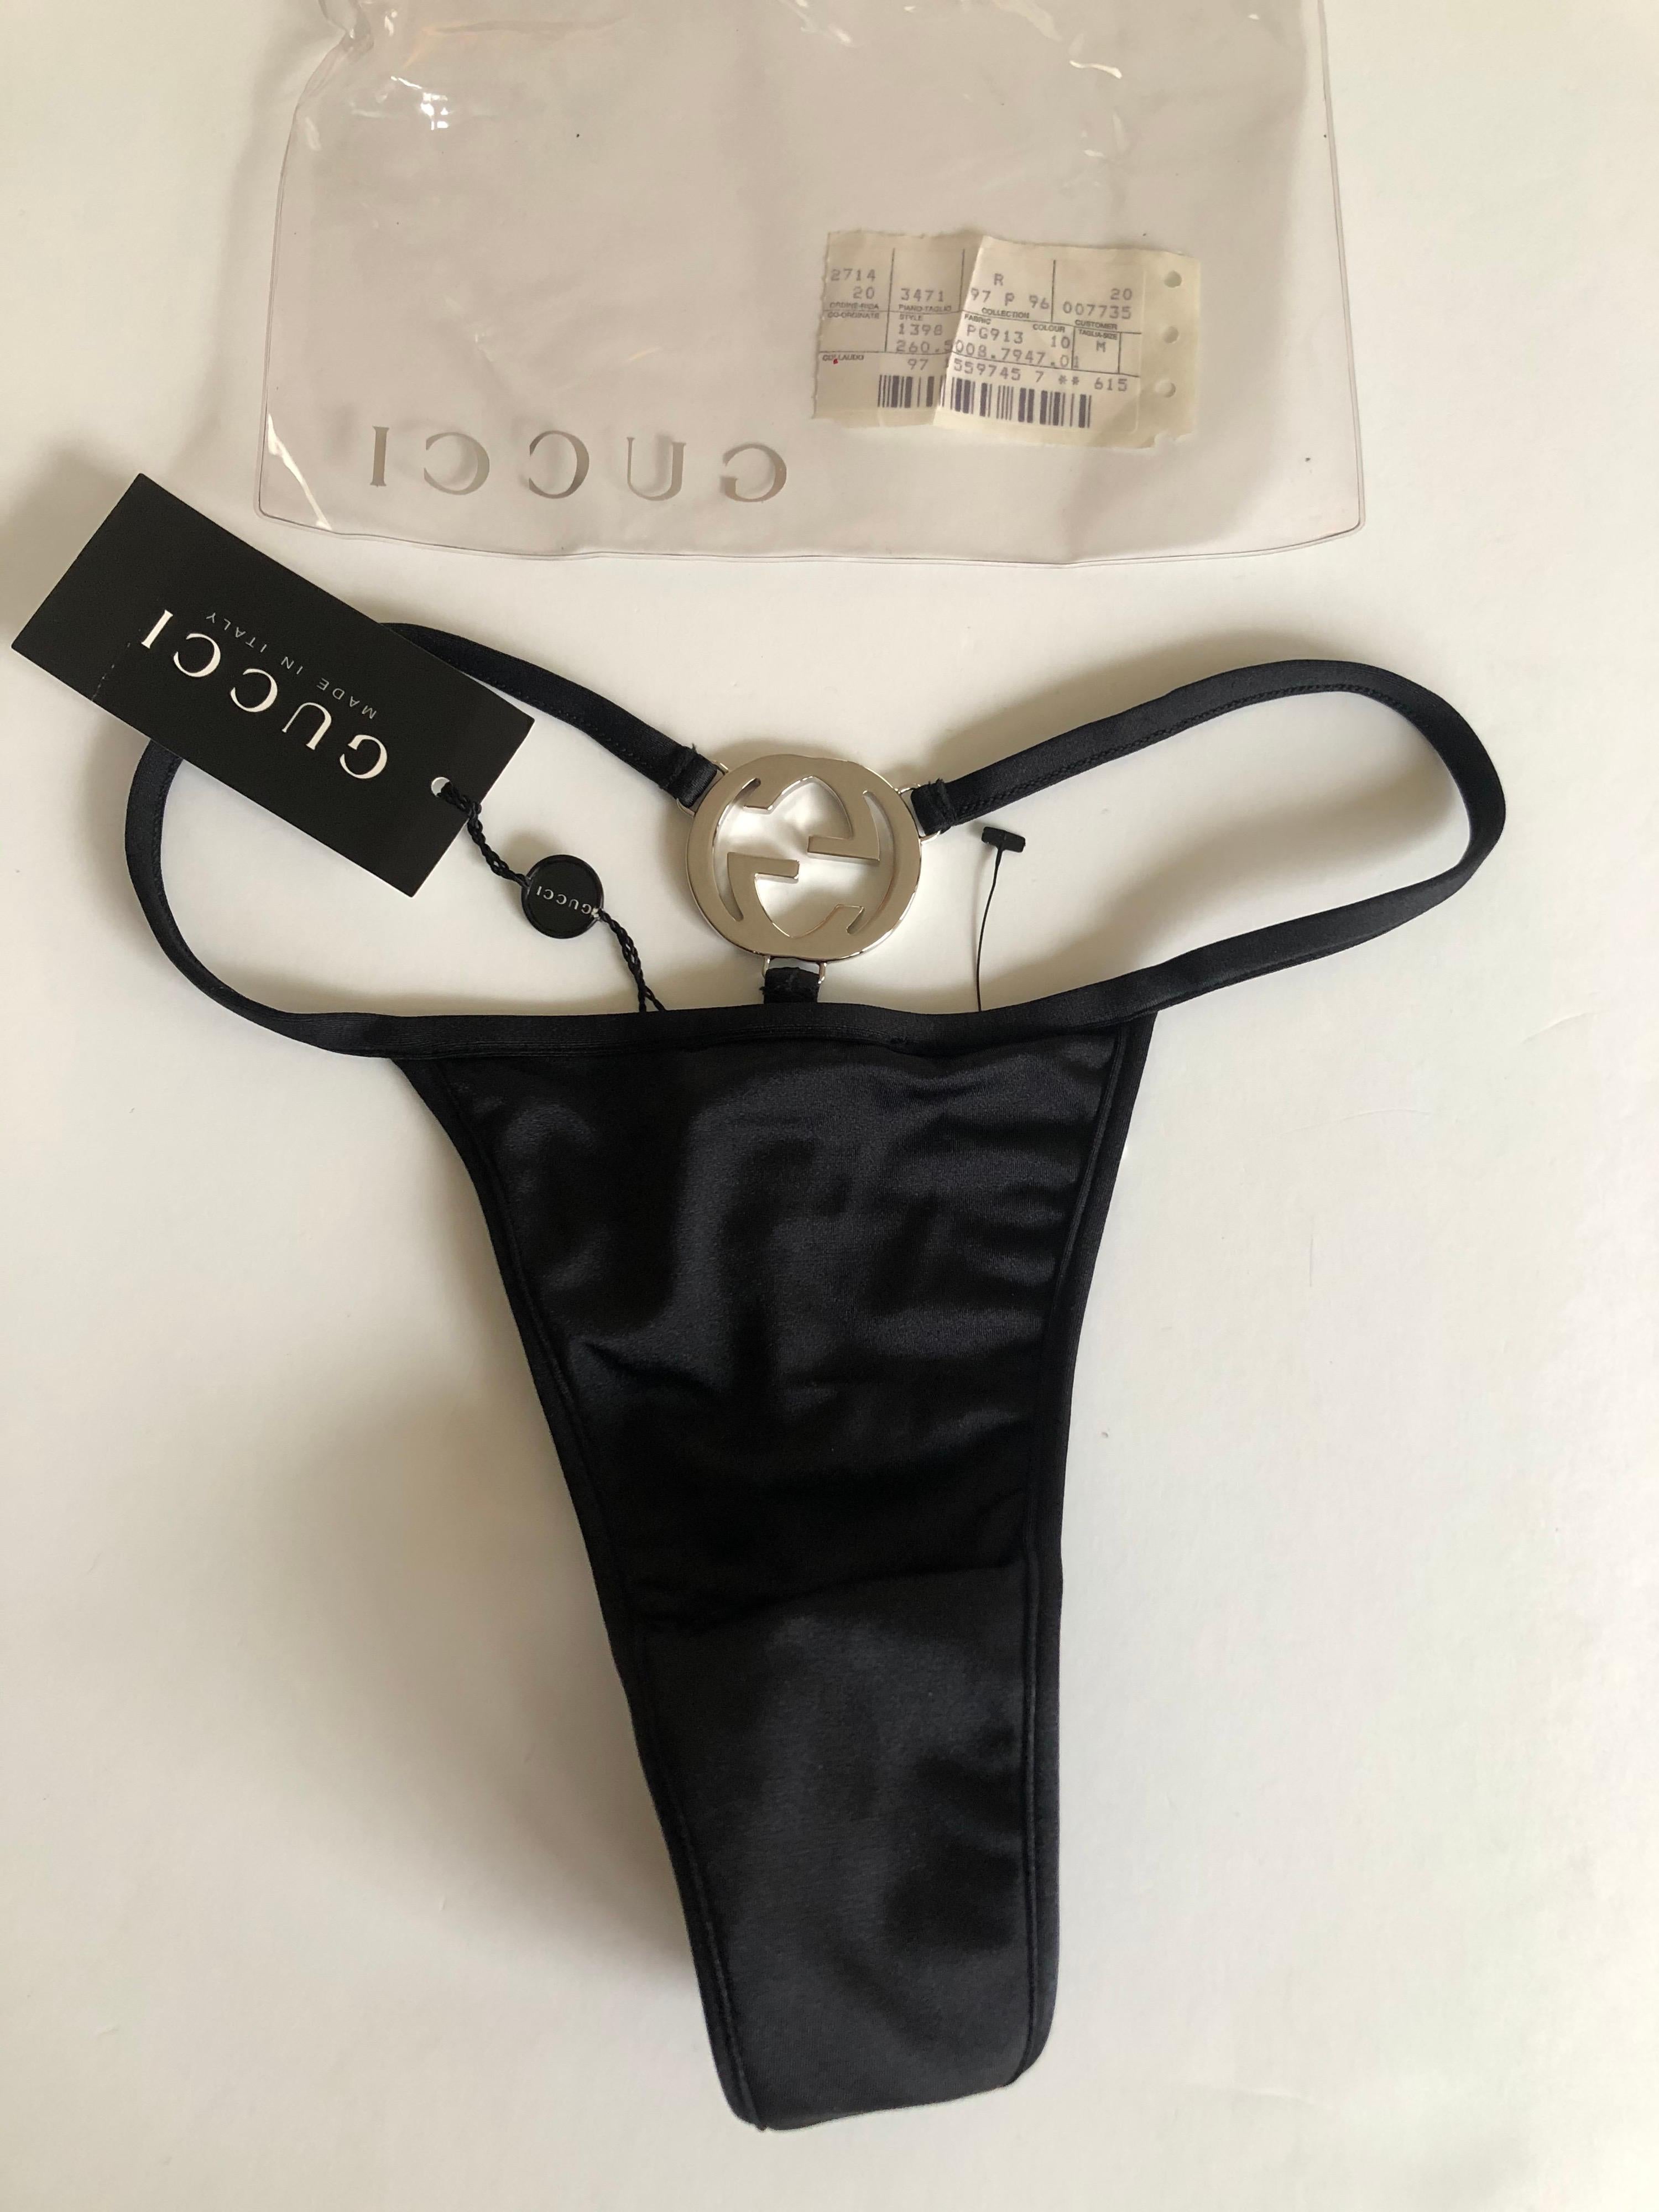 Tom Ford for Gucci S/S 1997 Runway Vintage Logo G String Thong Panty  Underwear at 1stDibs | gucci thong underwear, gucci g string, prada thong  underwear